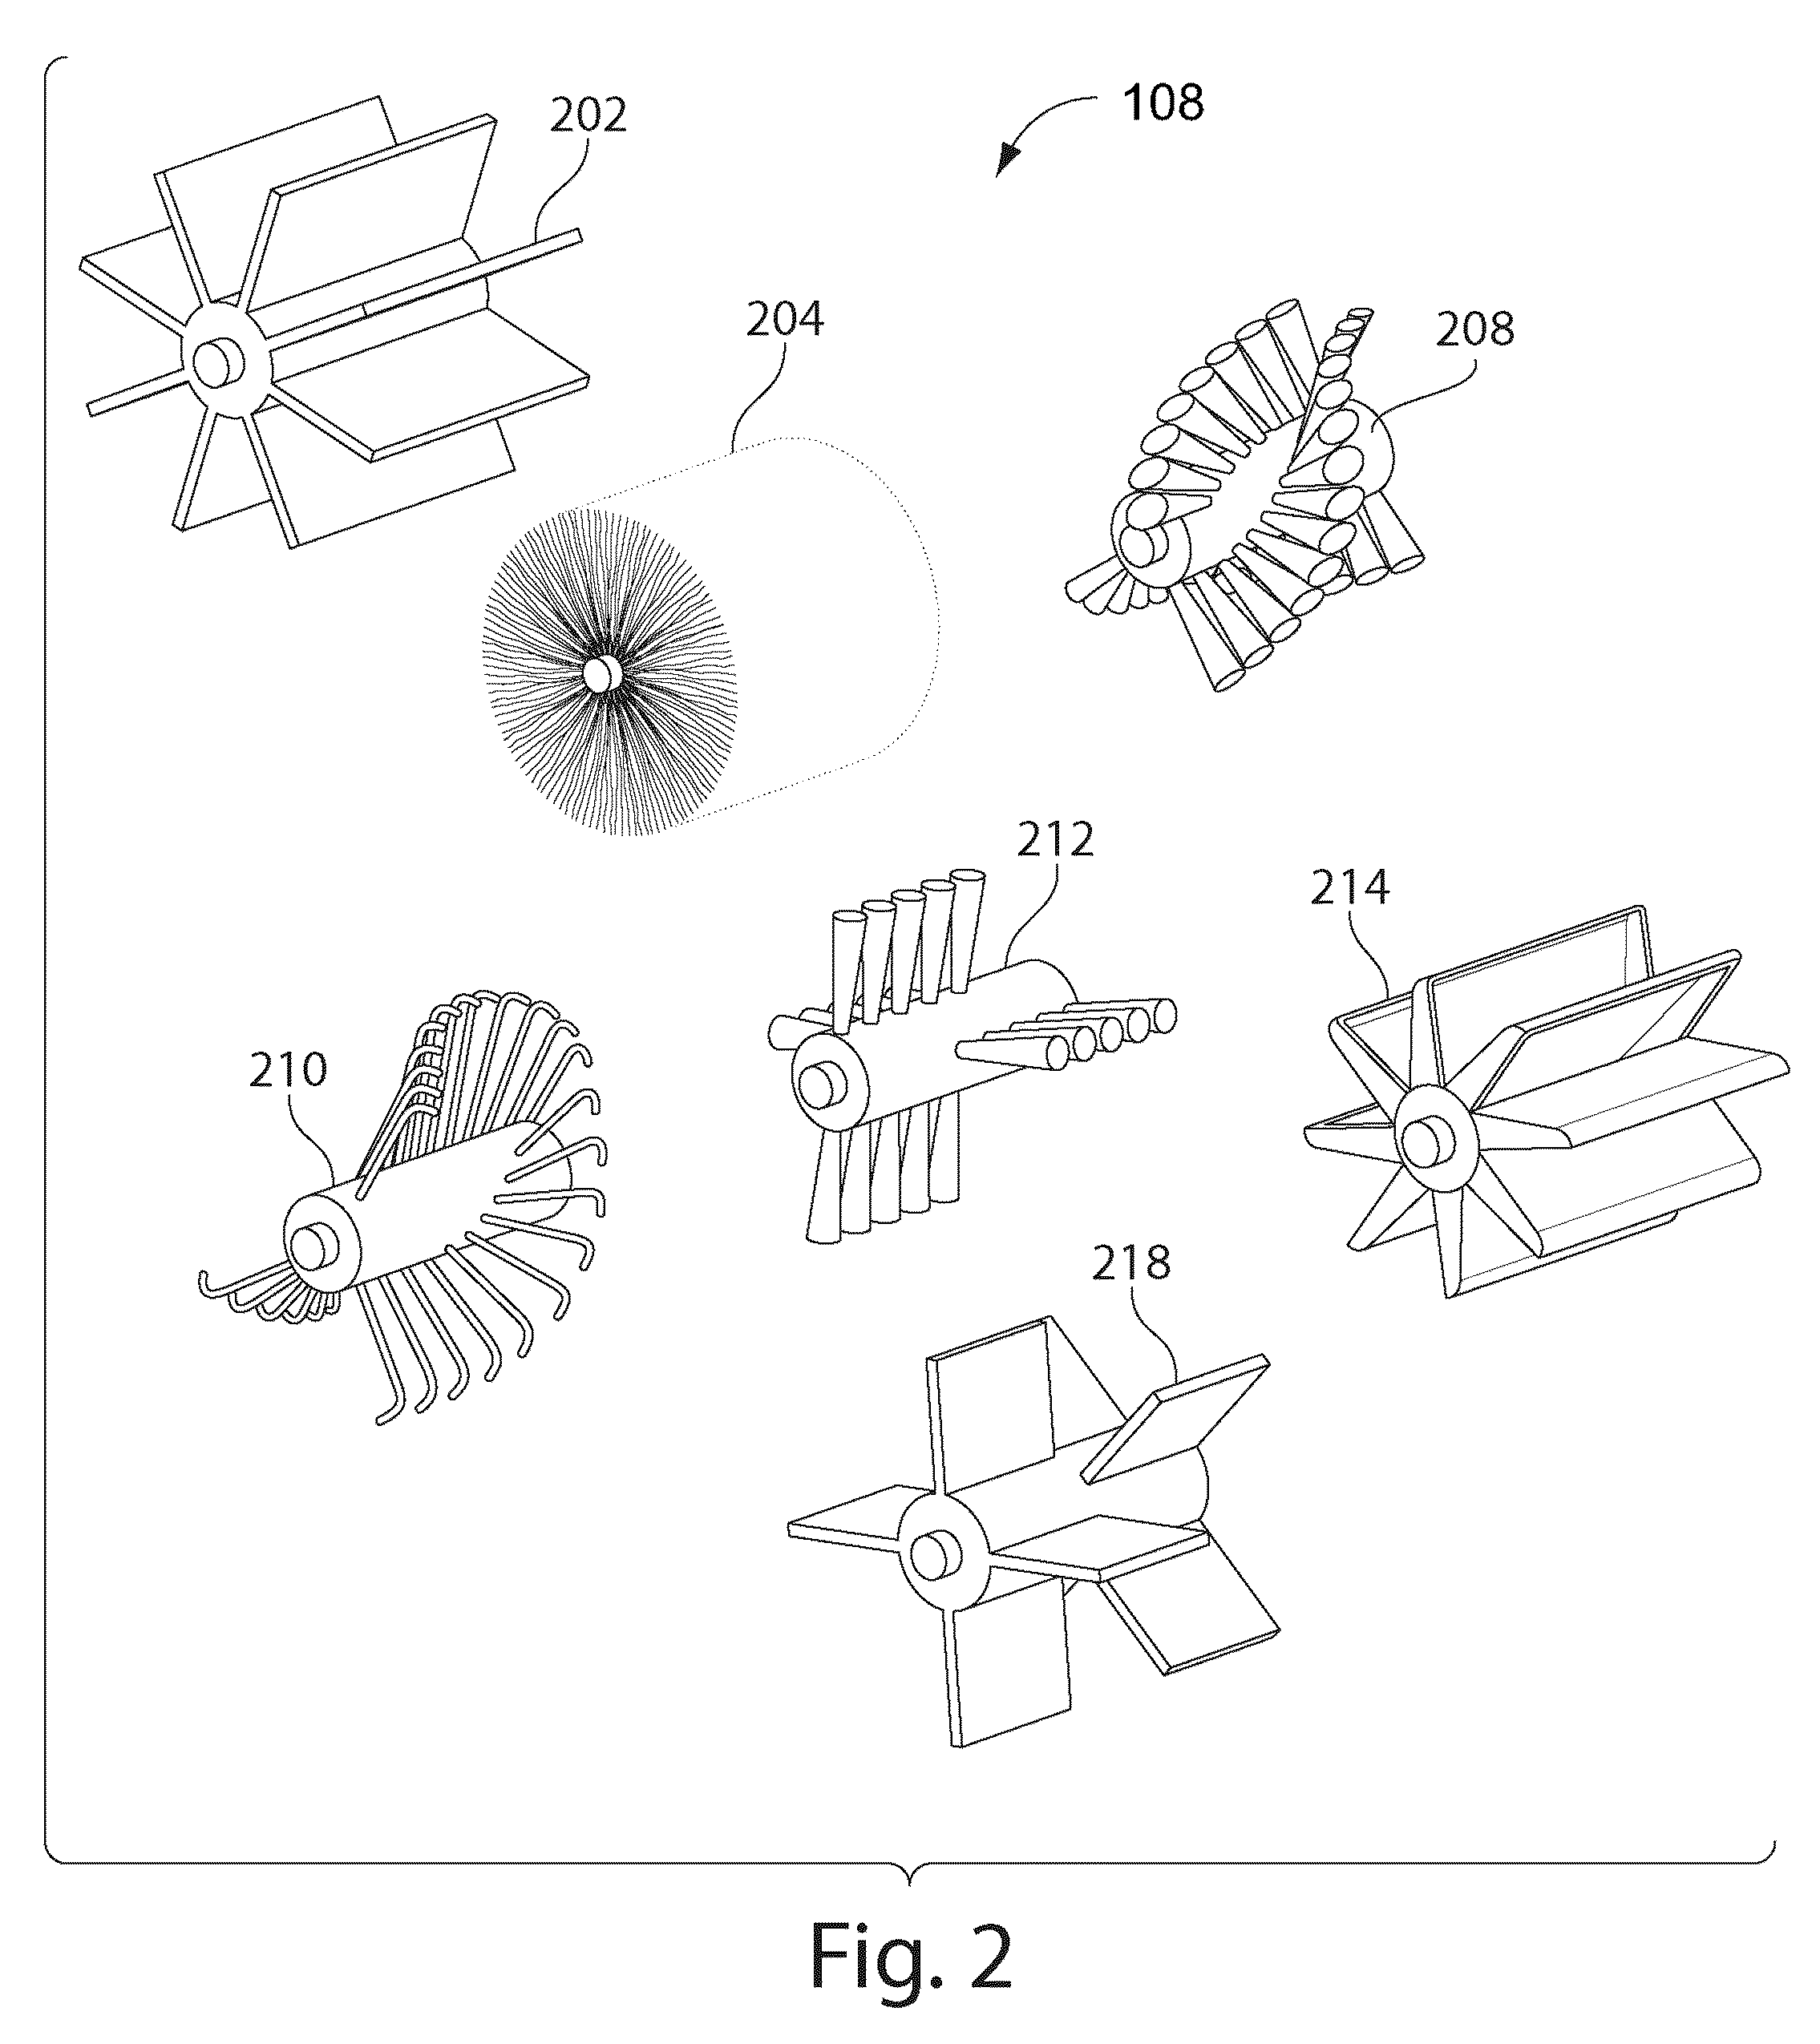 Systems and methods of a gutter cleaning system